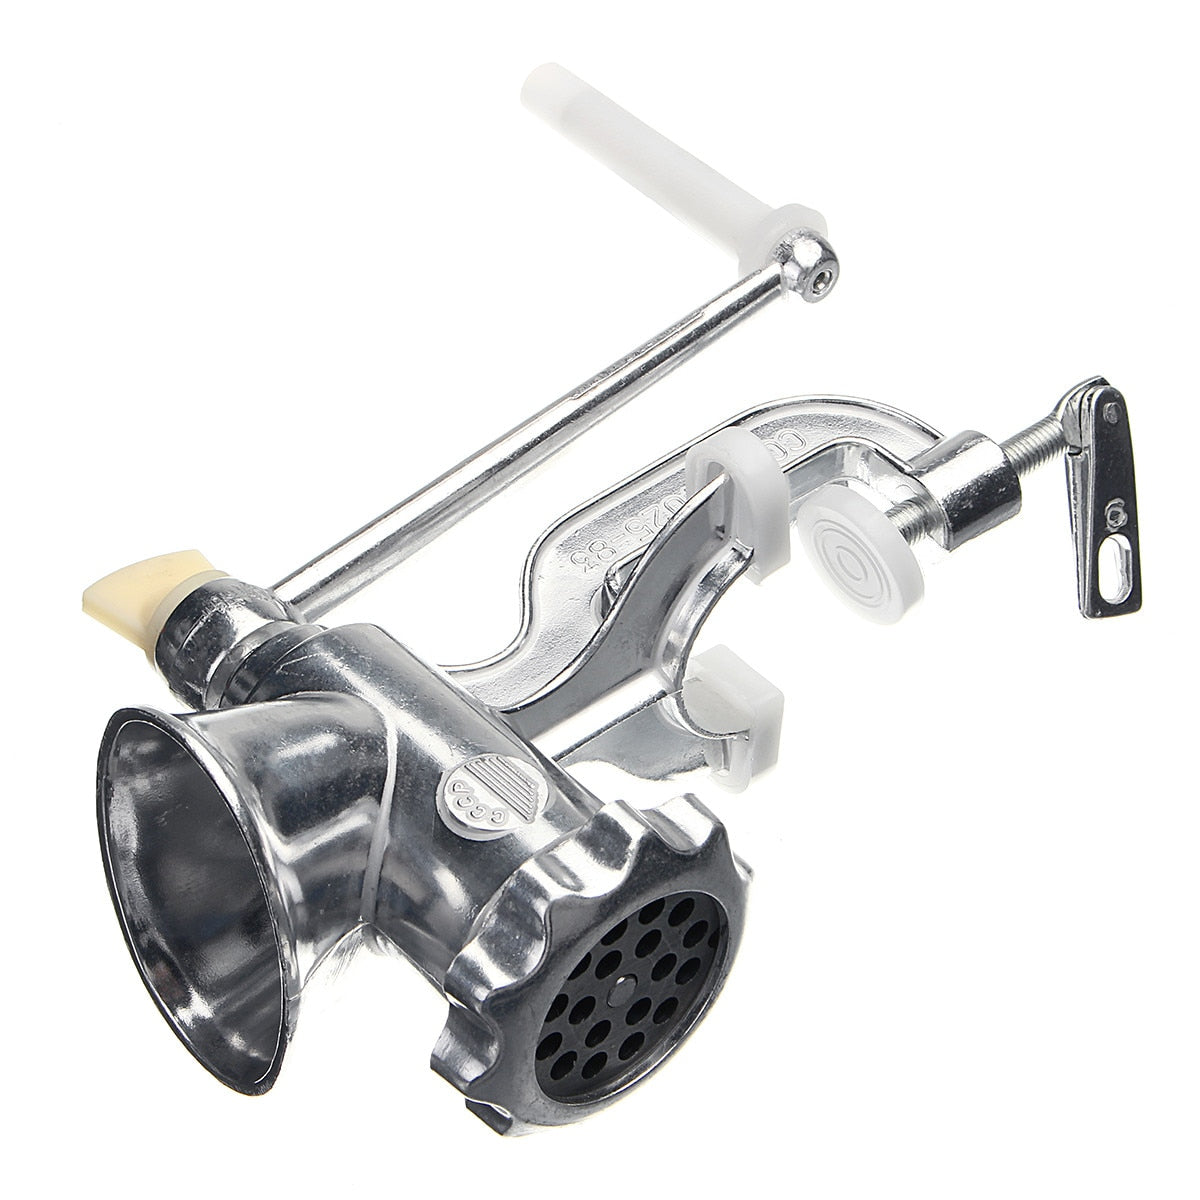 2-in-1 Household Manual Hand Operated Juice Squeezer and Meat Grinder